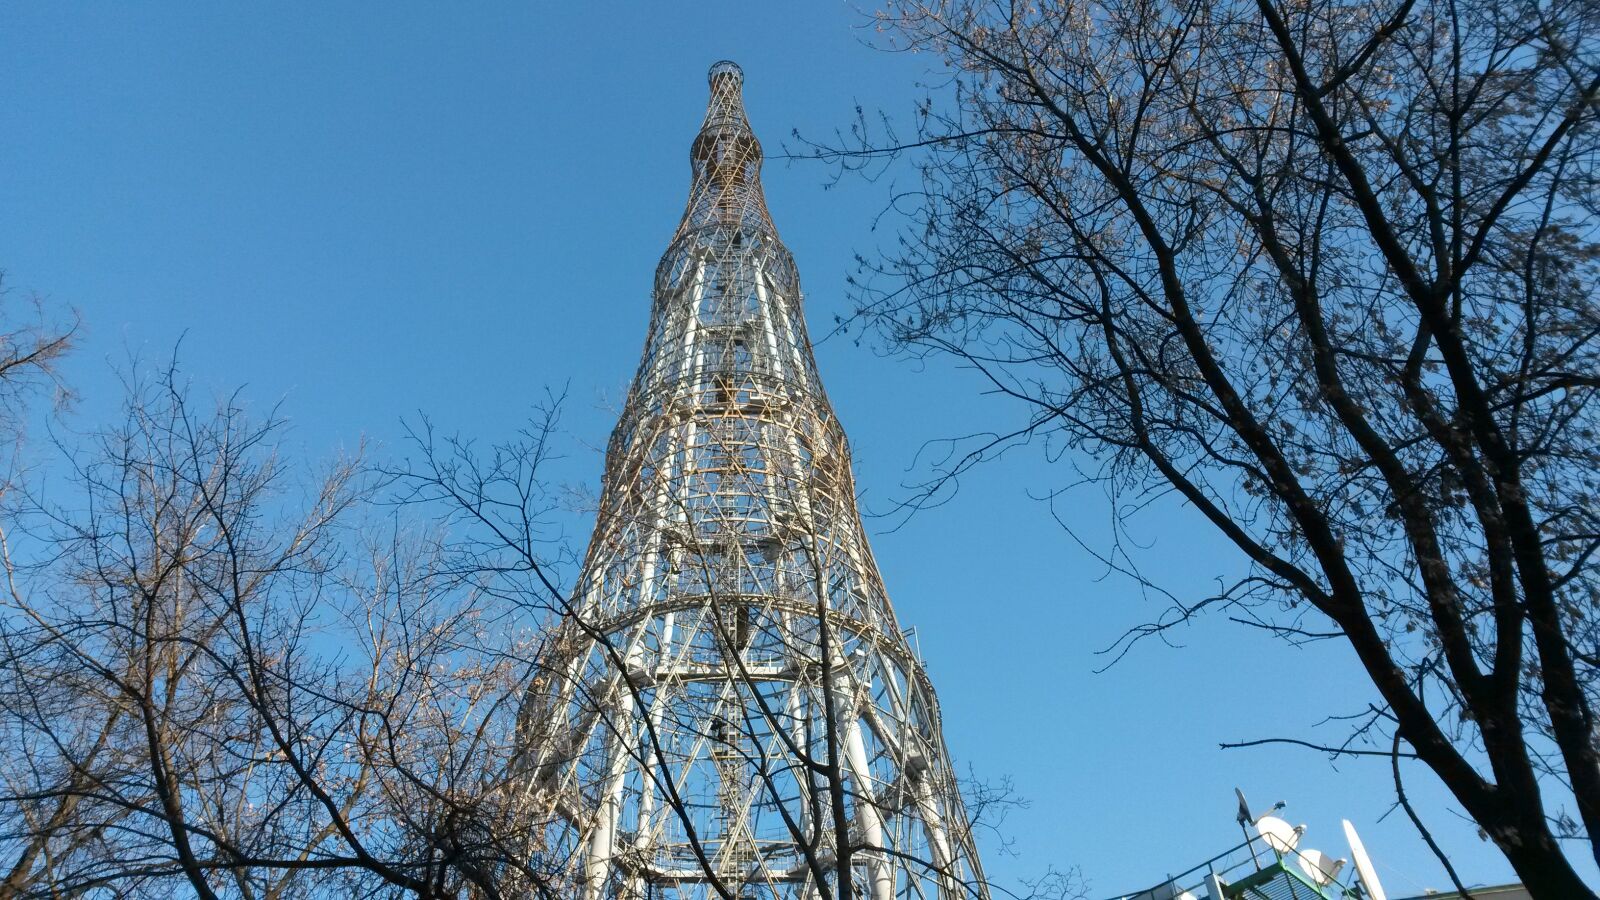 Samsung Galaxy S4 Mini sample photo. Moscow, russia, shukhov tower photography